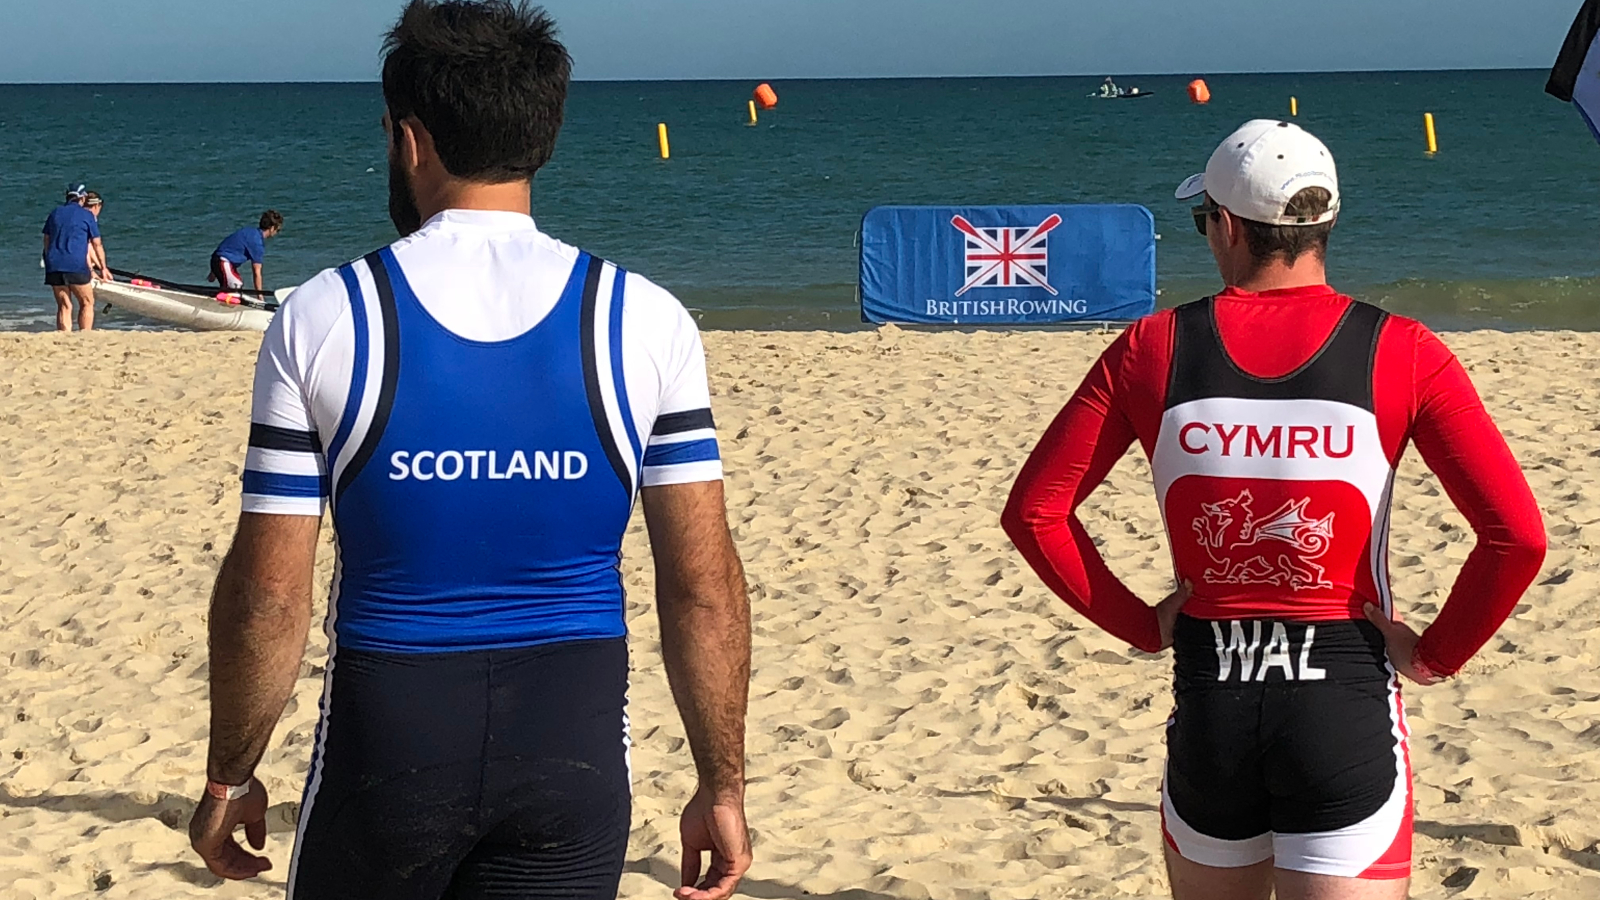 Home International Rowing announces exciting new Beach Sprints event